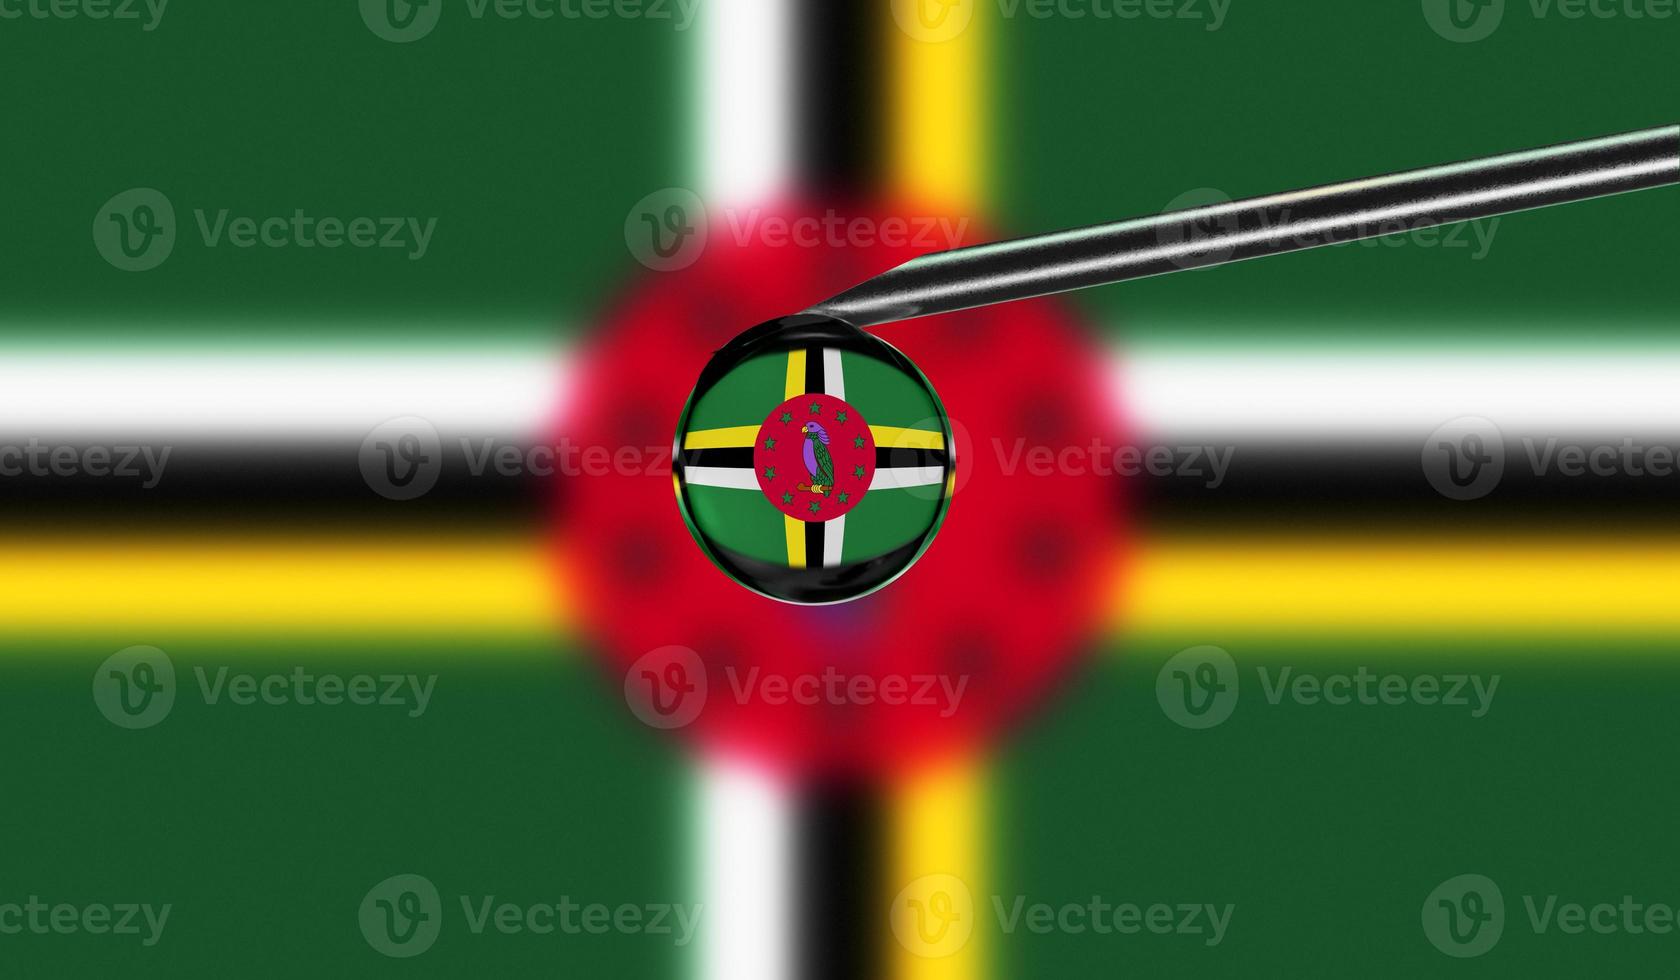 Vaccine syringe with drop on needle against national flag of Dominica background. Medical concept vaccination. Coronavirus Sars-Cov-2 pandemic protection. National safety idea. photo